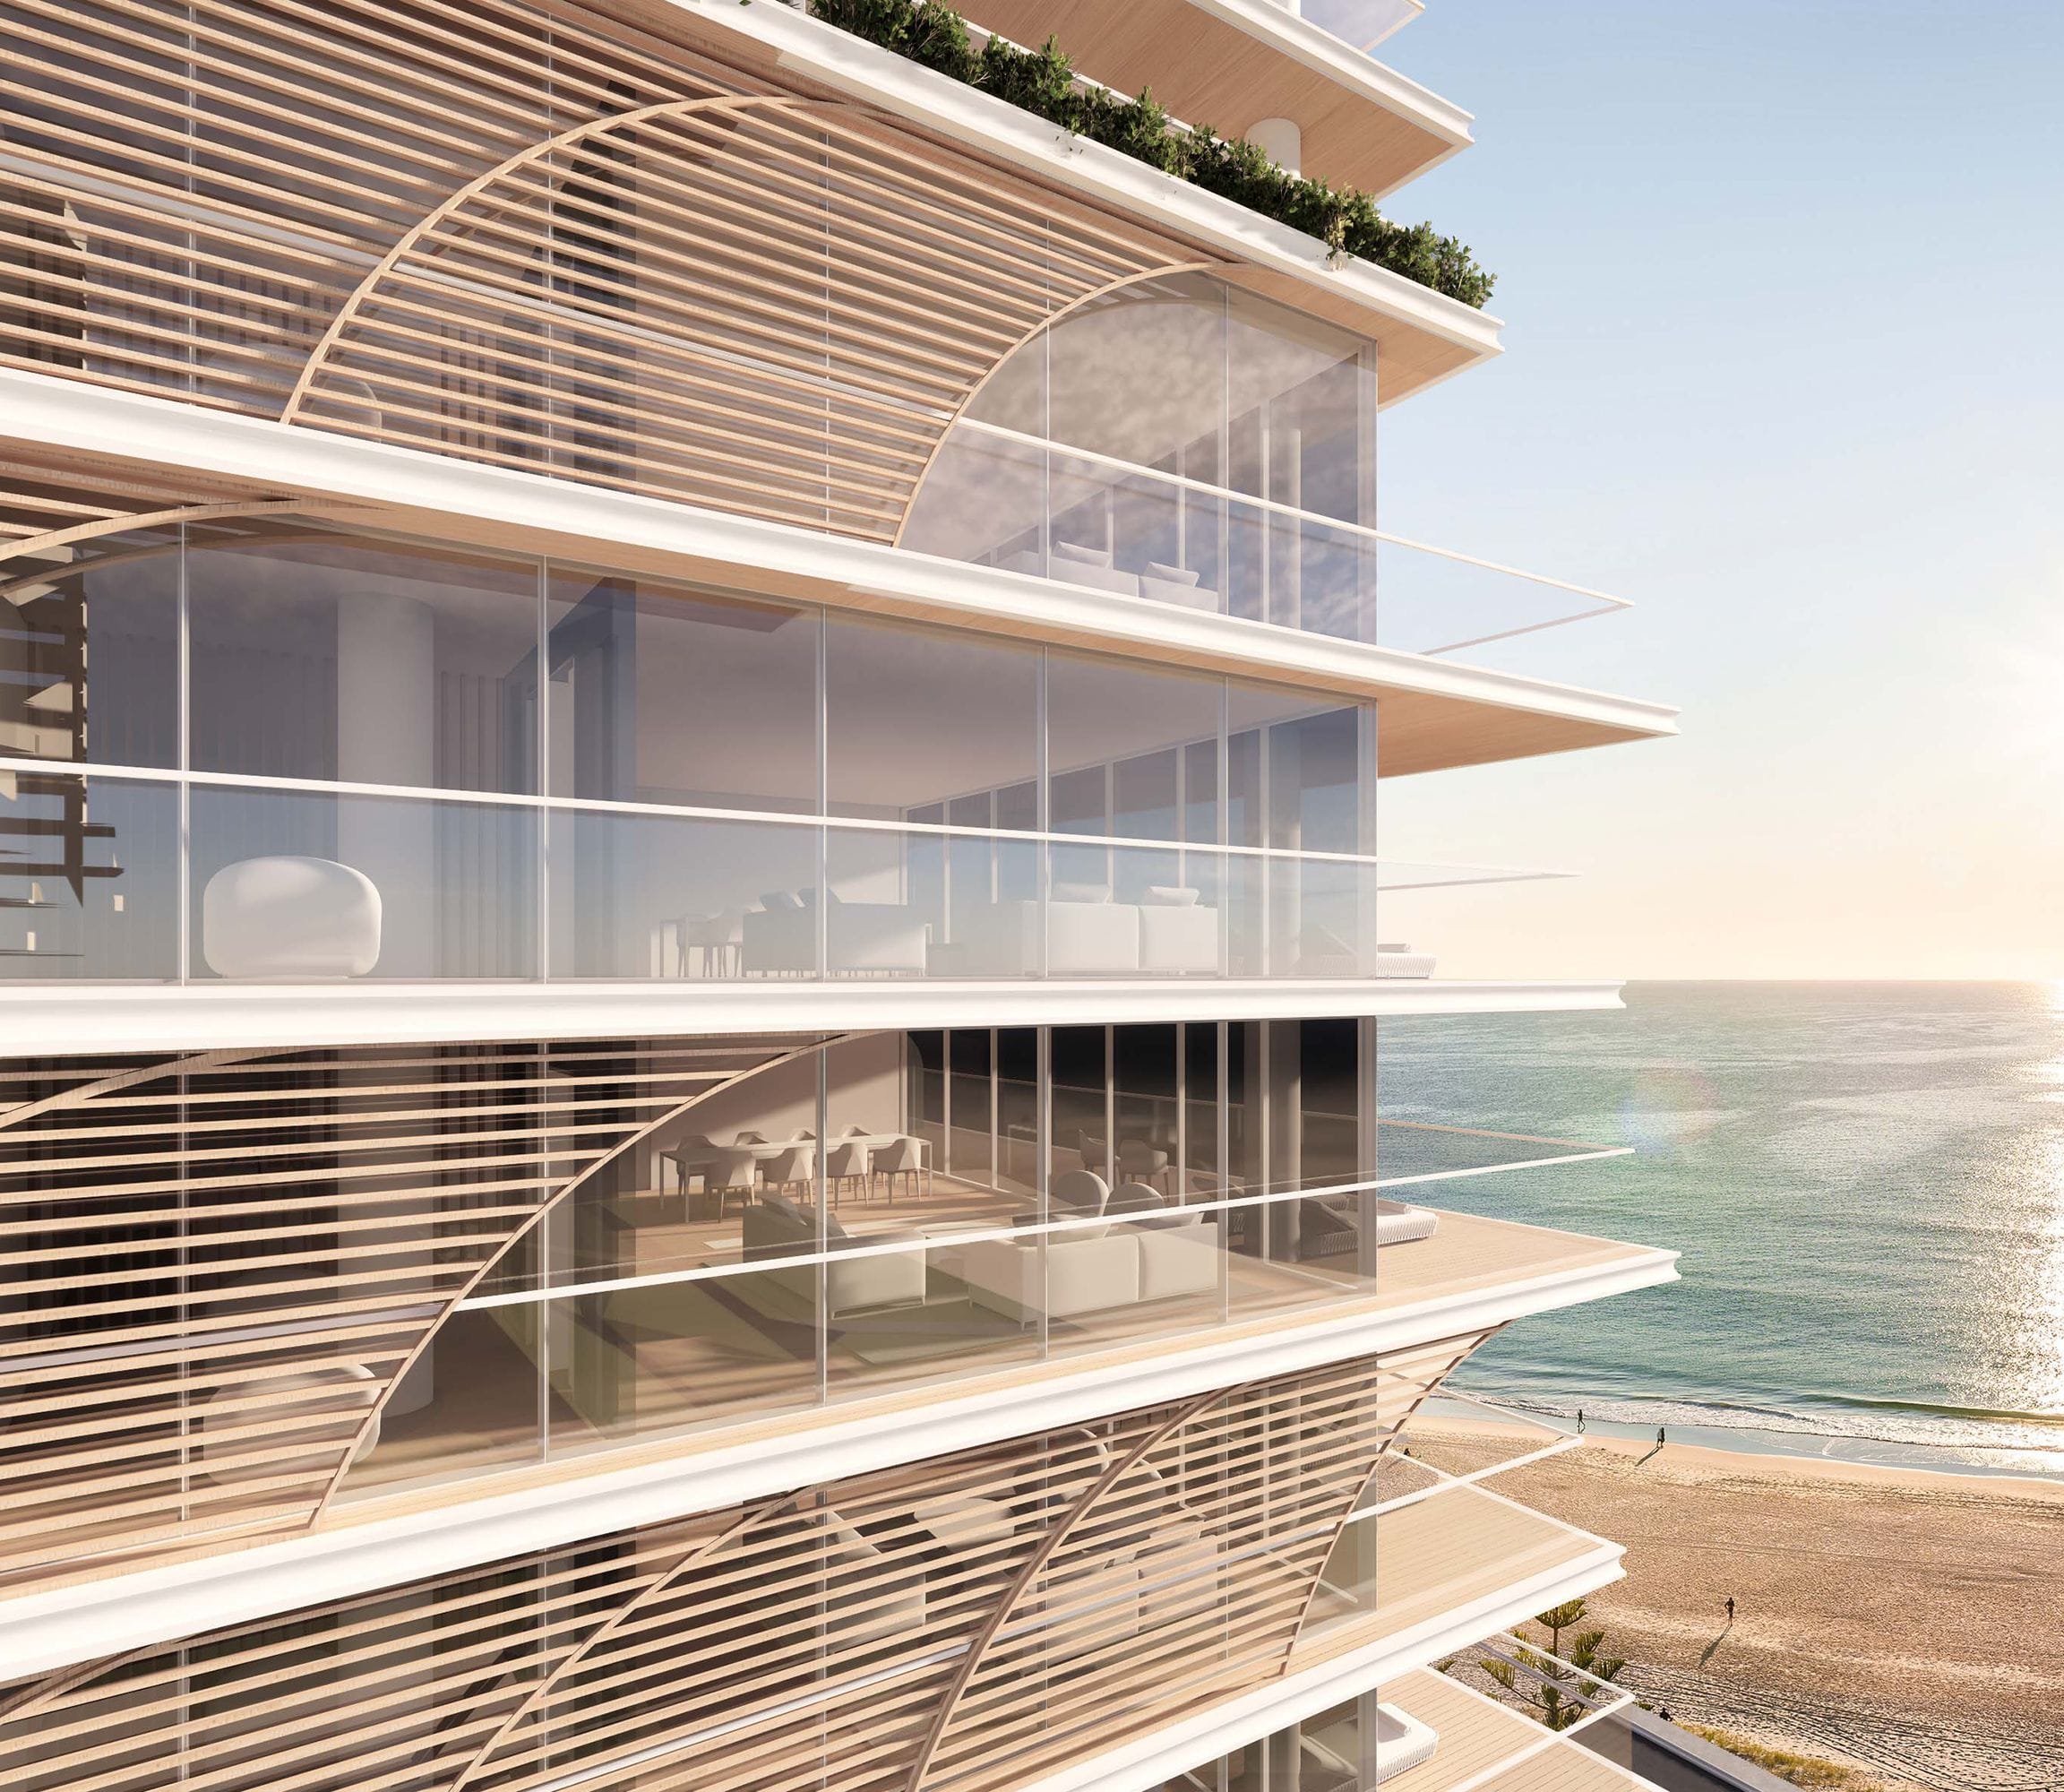 Devine abandons Alba to upsize at Burleigh Heads with $400m Burly tower